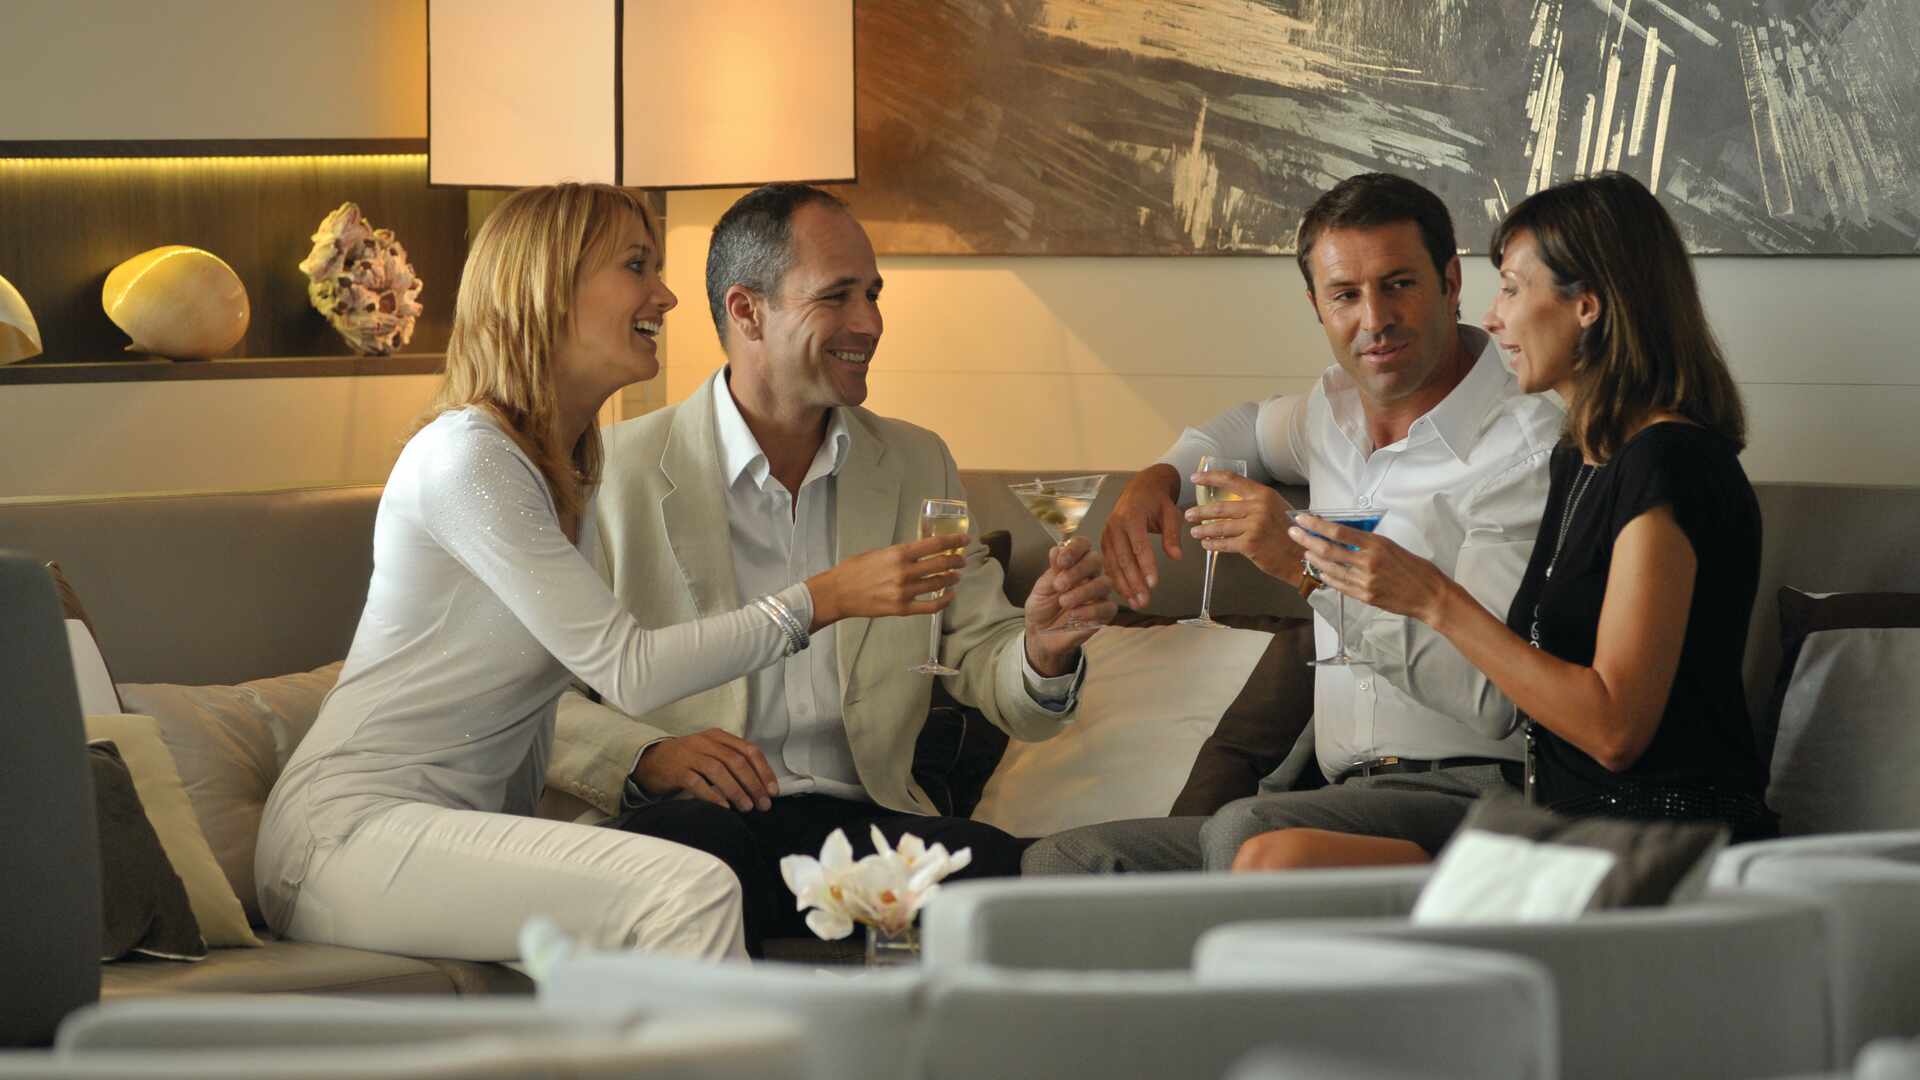 Passengers sharing drinks in lounge, Le Boreal